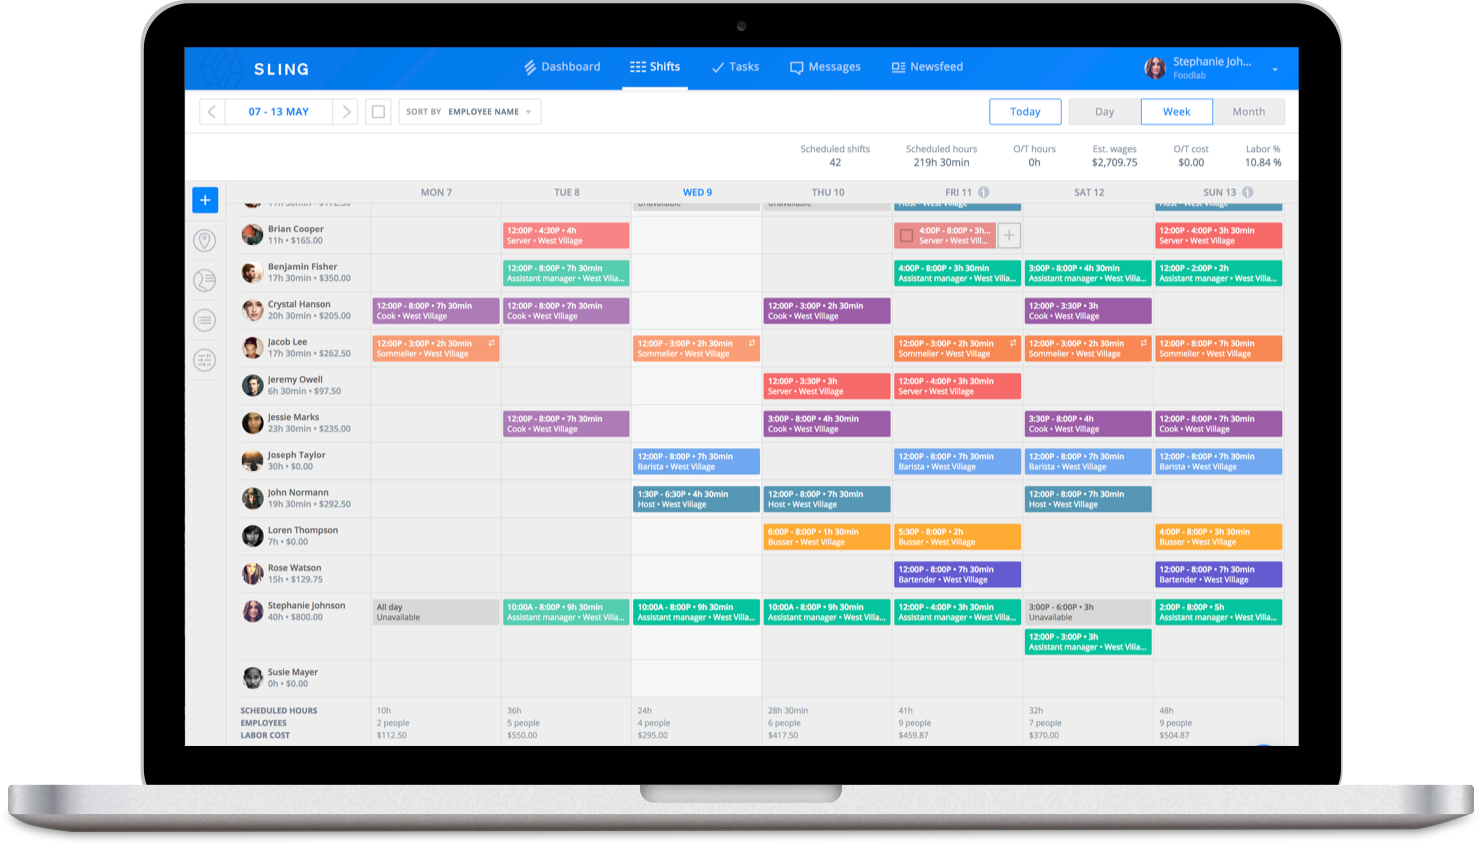 Sling scheduling software